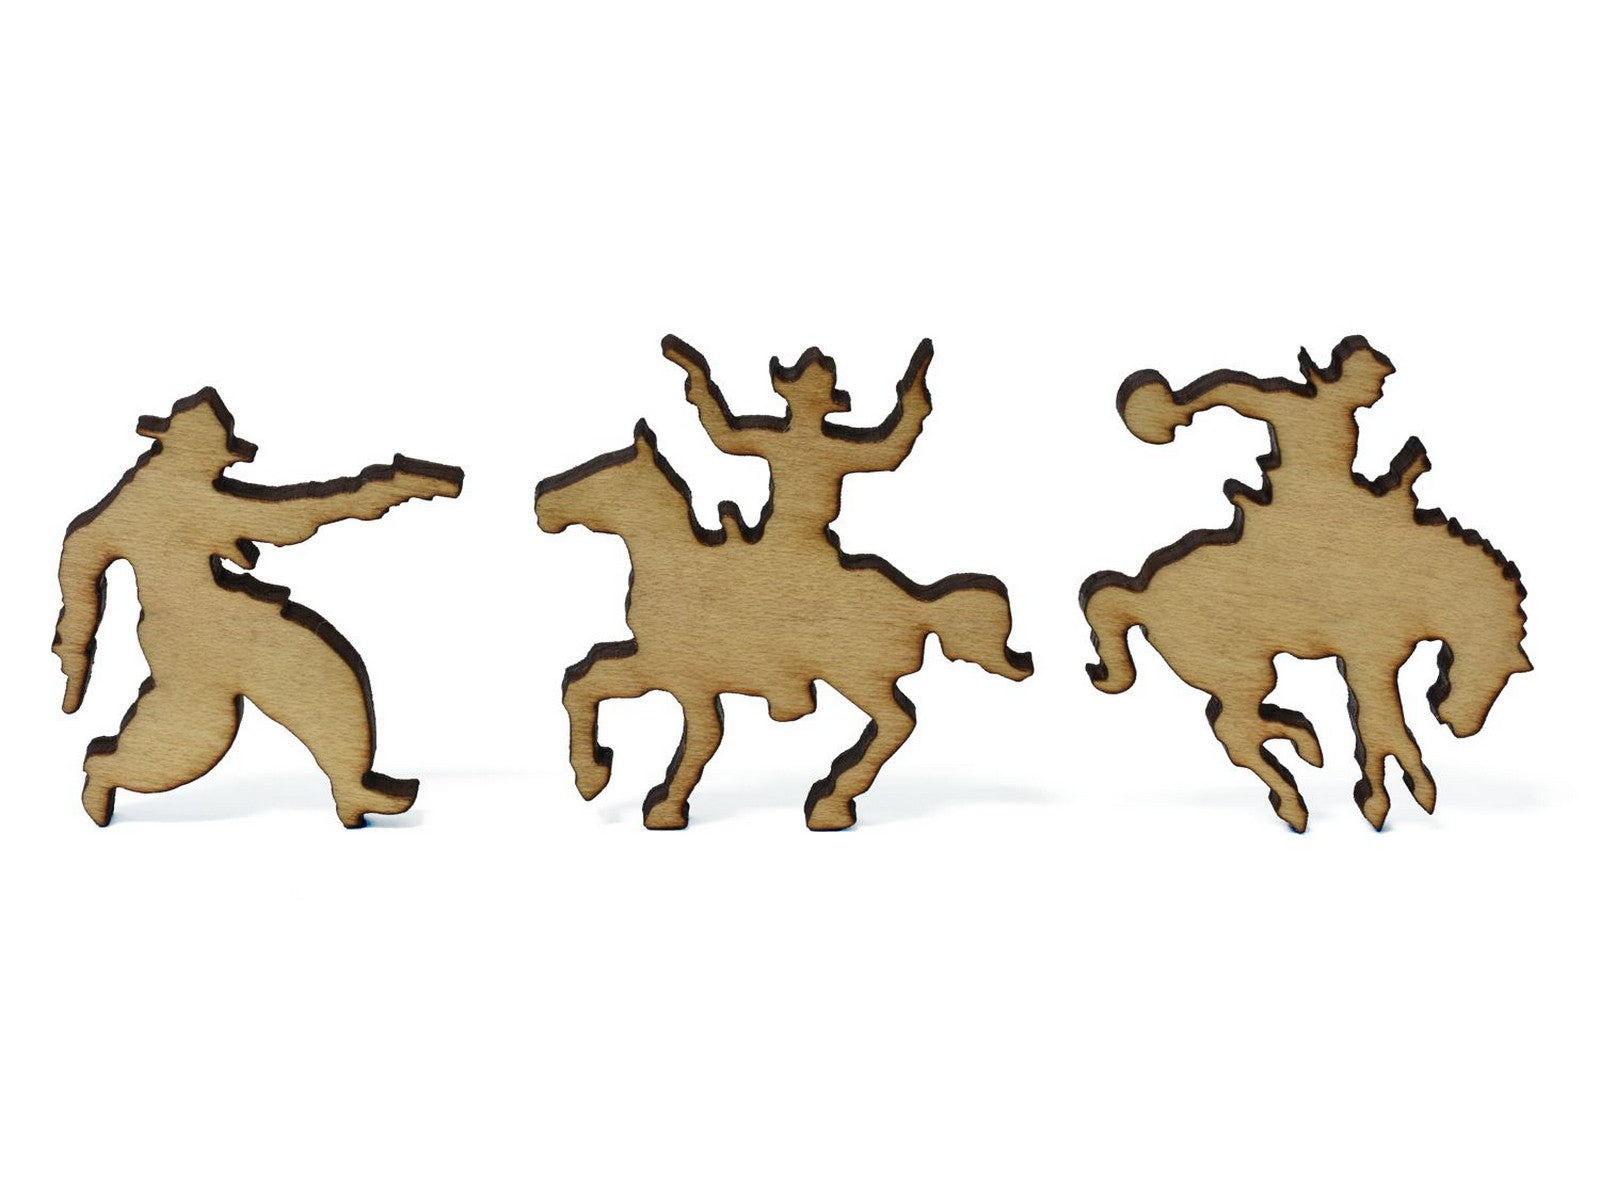 A closeup of pieces in the shape of three cowboys.